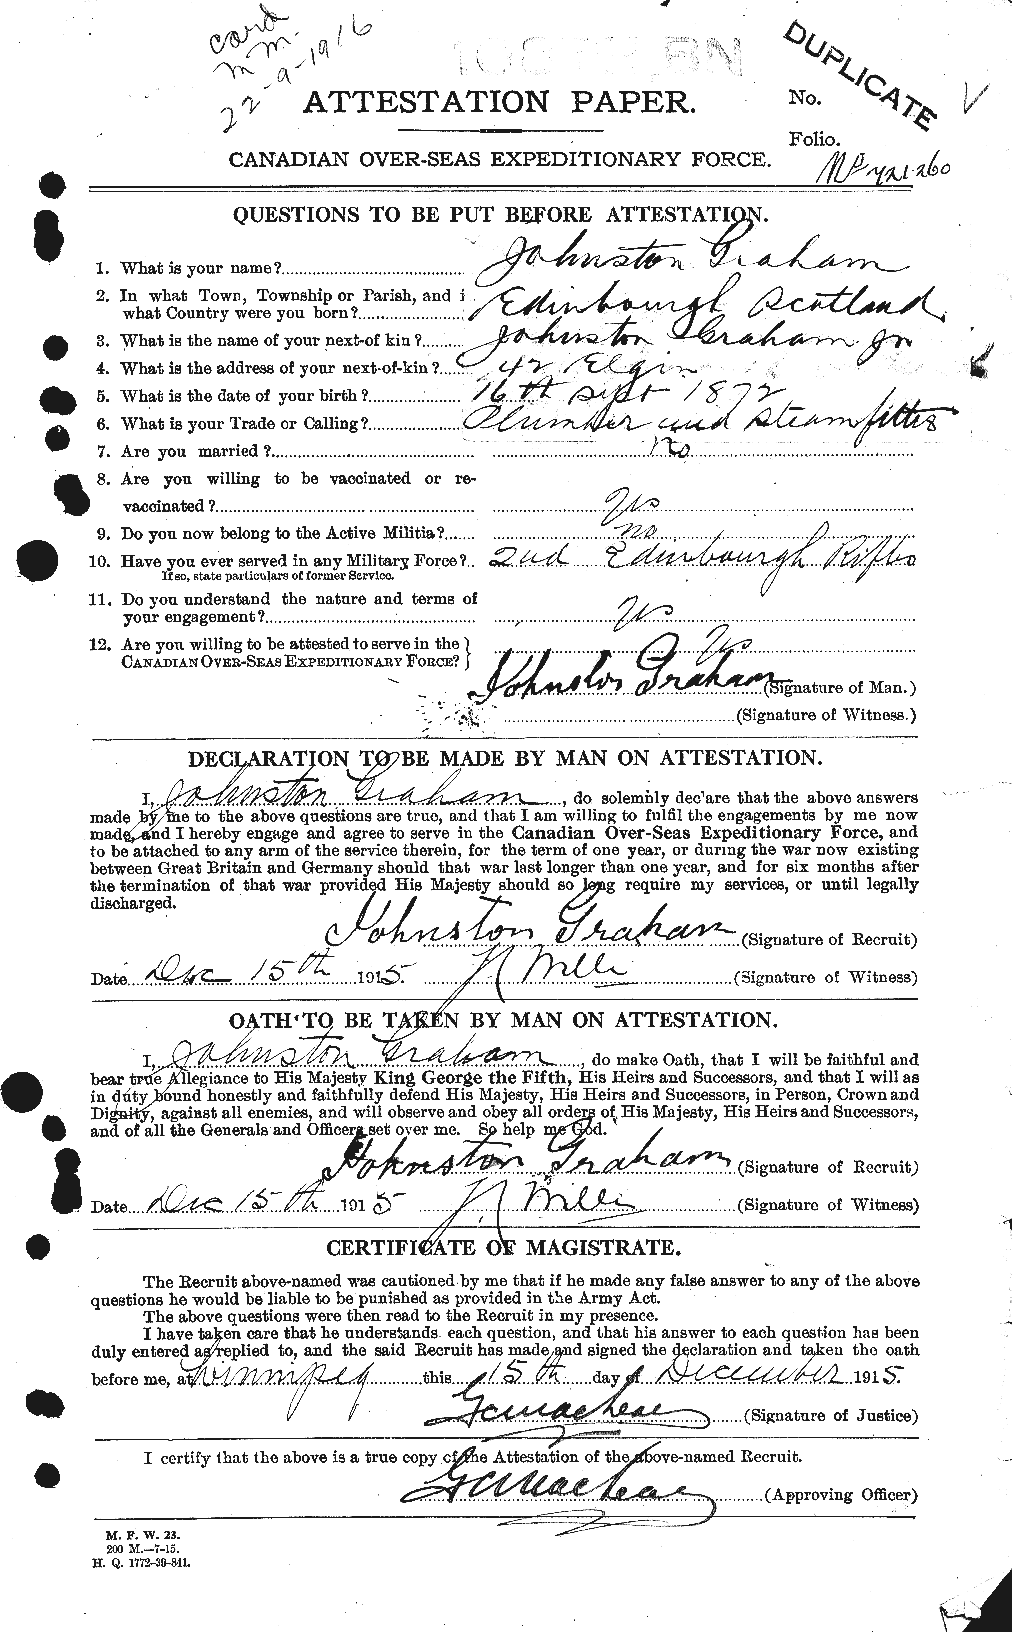 Personnel Records of the First World War - CEF 359223a